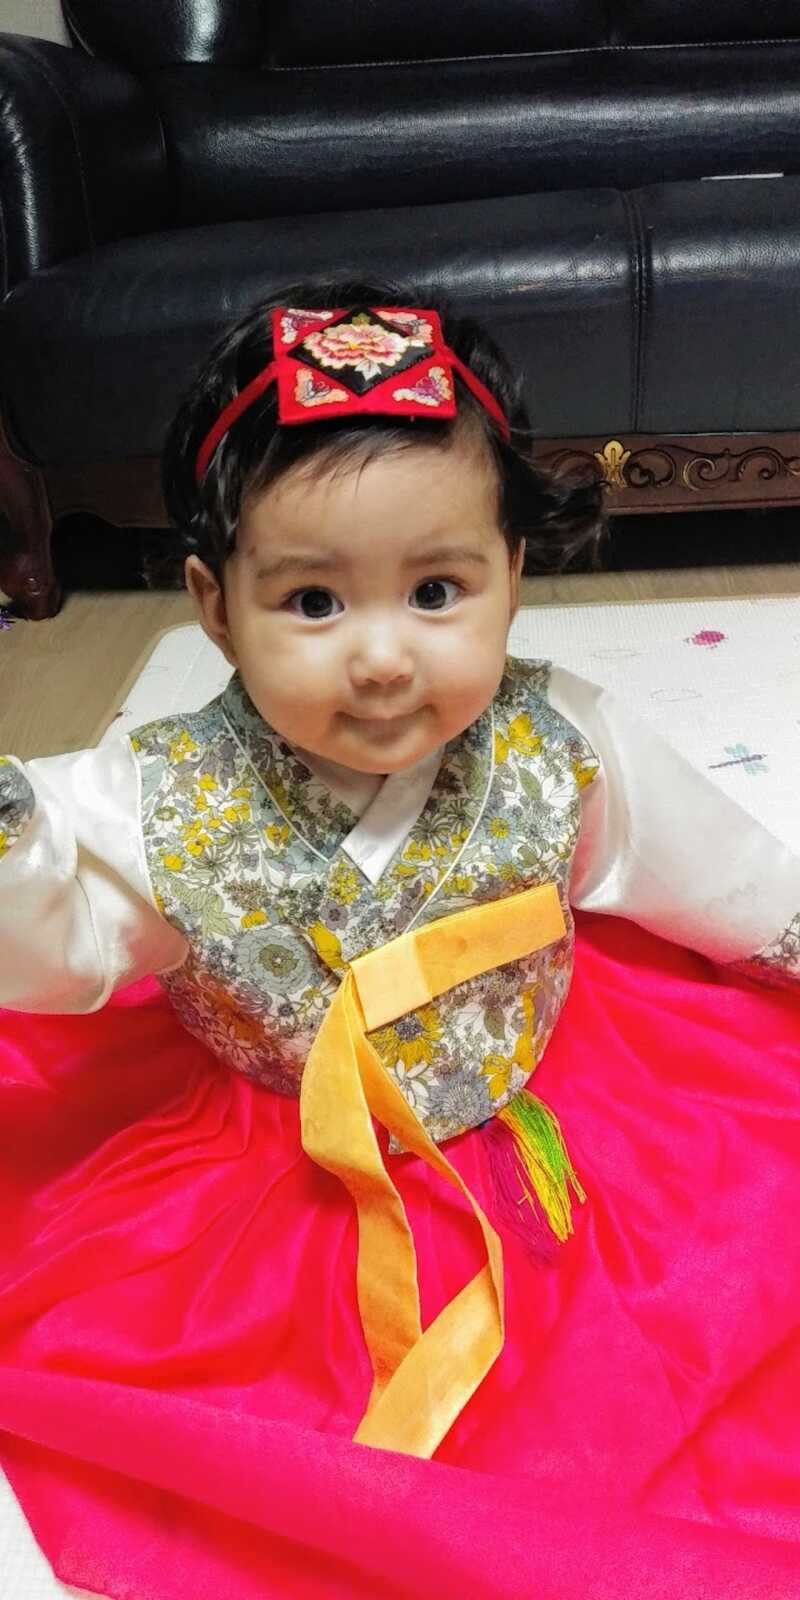 Korean baby girl sits on the floor in her traditional clothing.